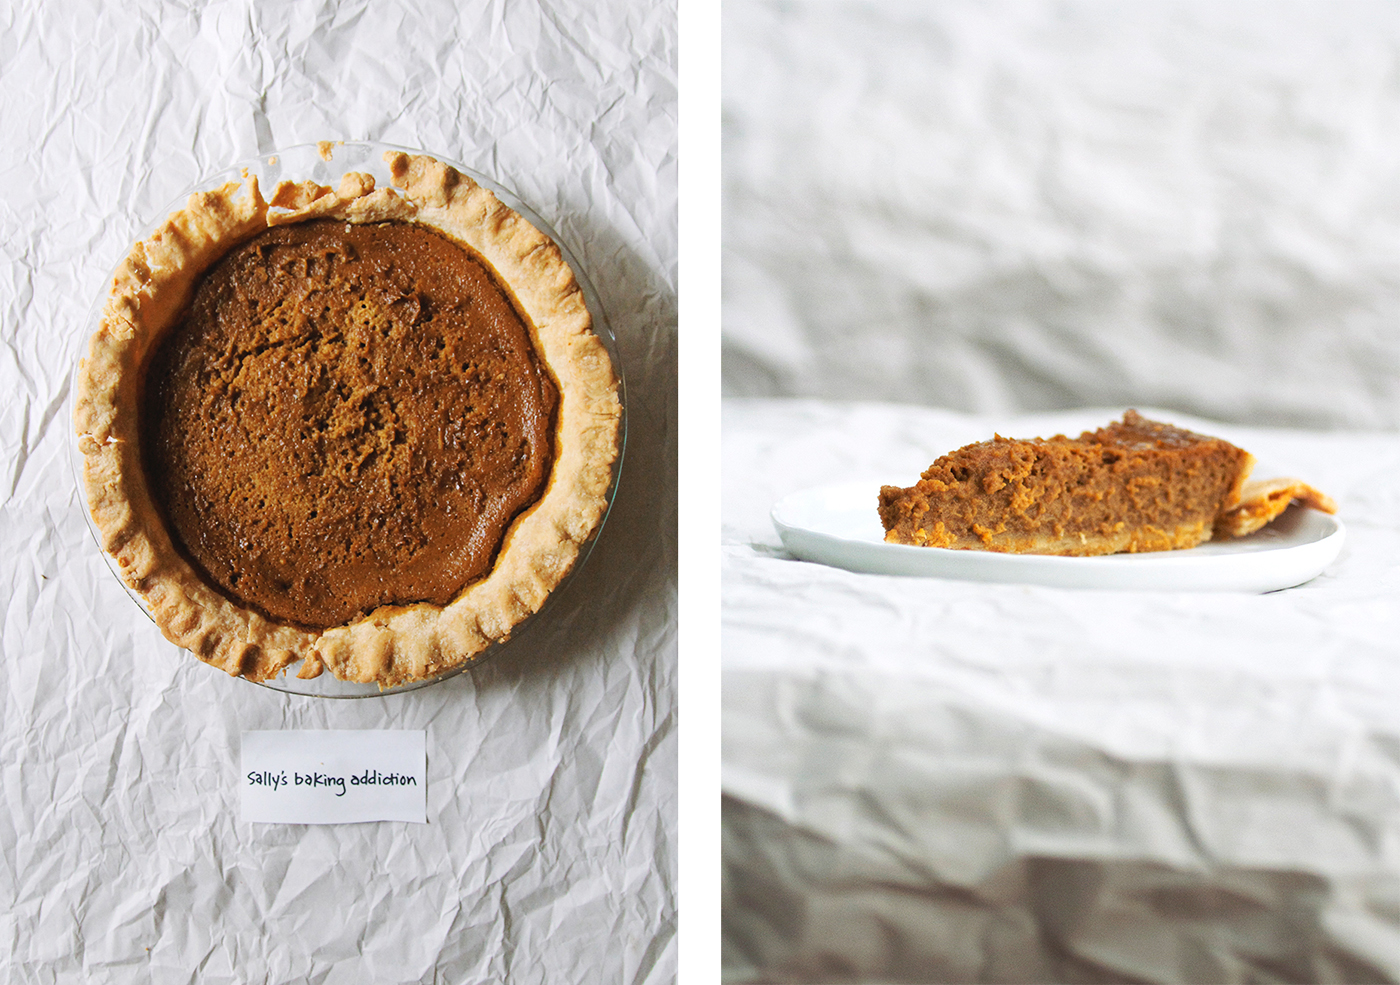 From left to right: Overhead view and sideview of Sally's Baking Addiction pumpkin pie recipe